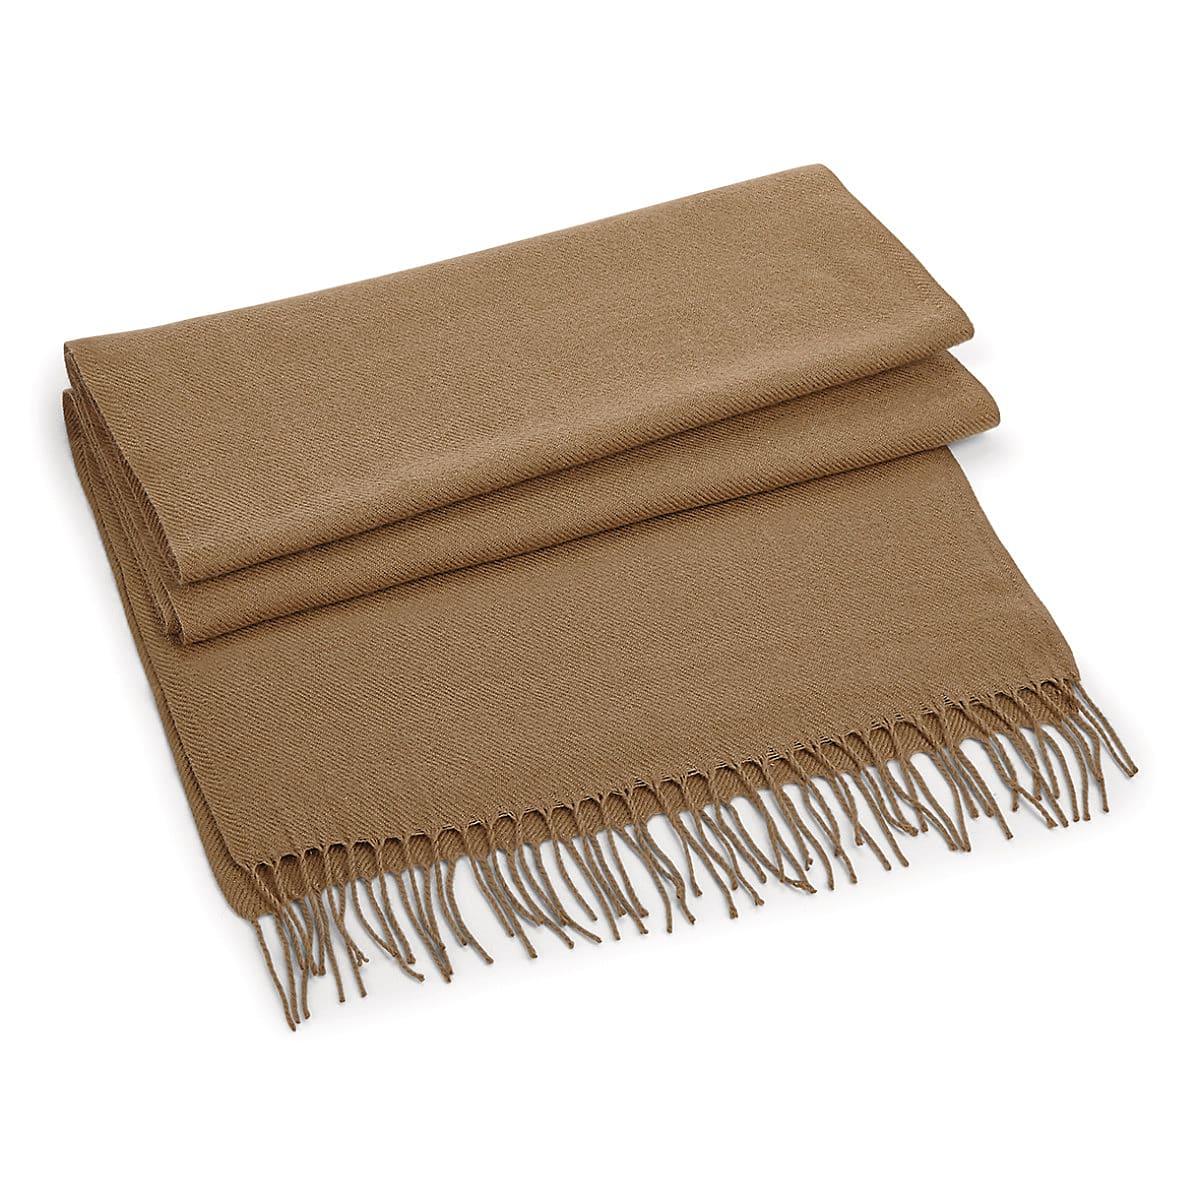 Beechfield Classic Woven Scarf in Biscuit (Product Code: B500)